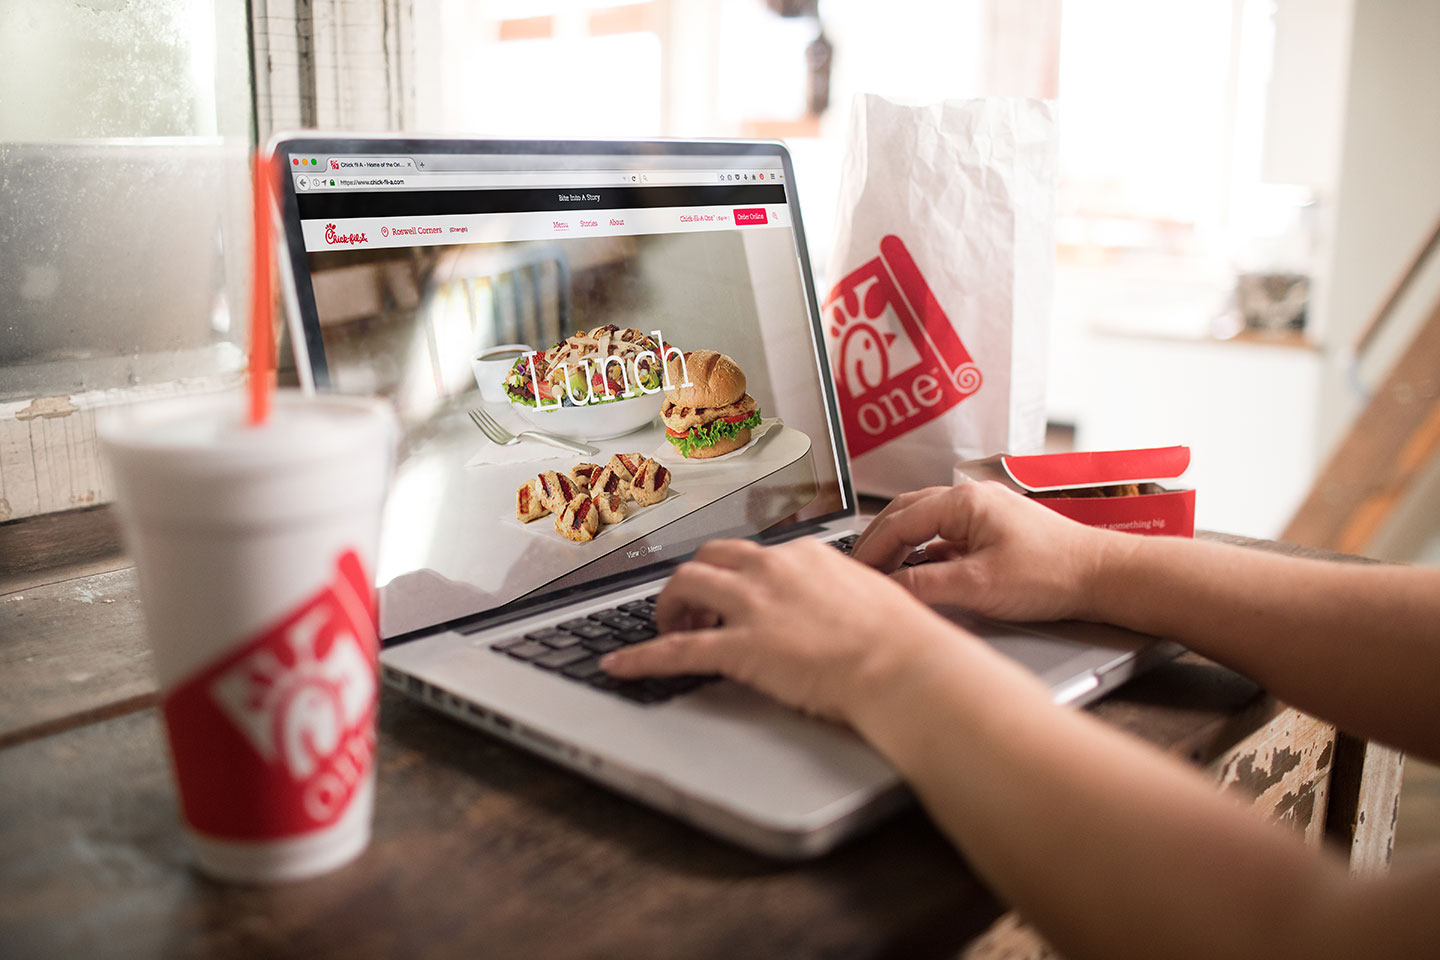 ChickfilA unveils new website for storytelling, brand information